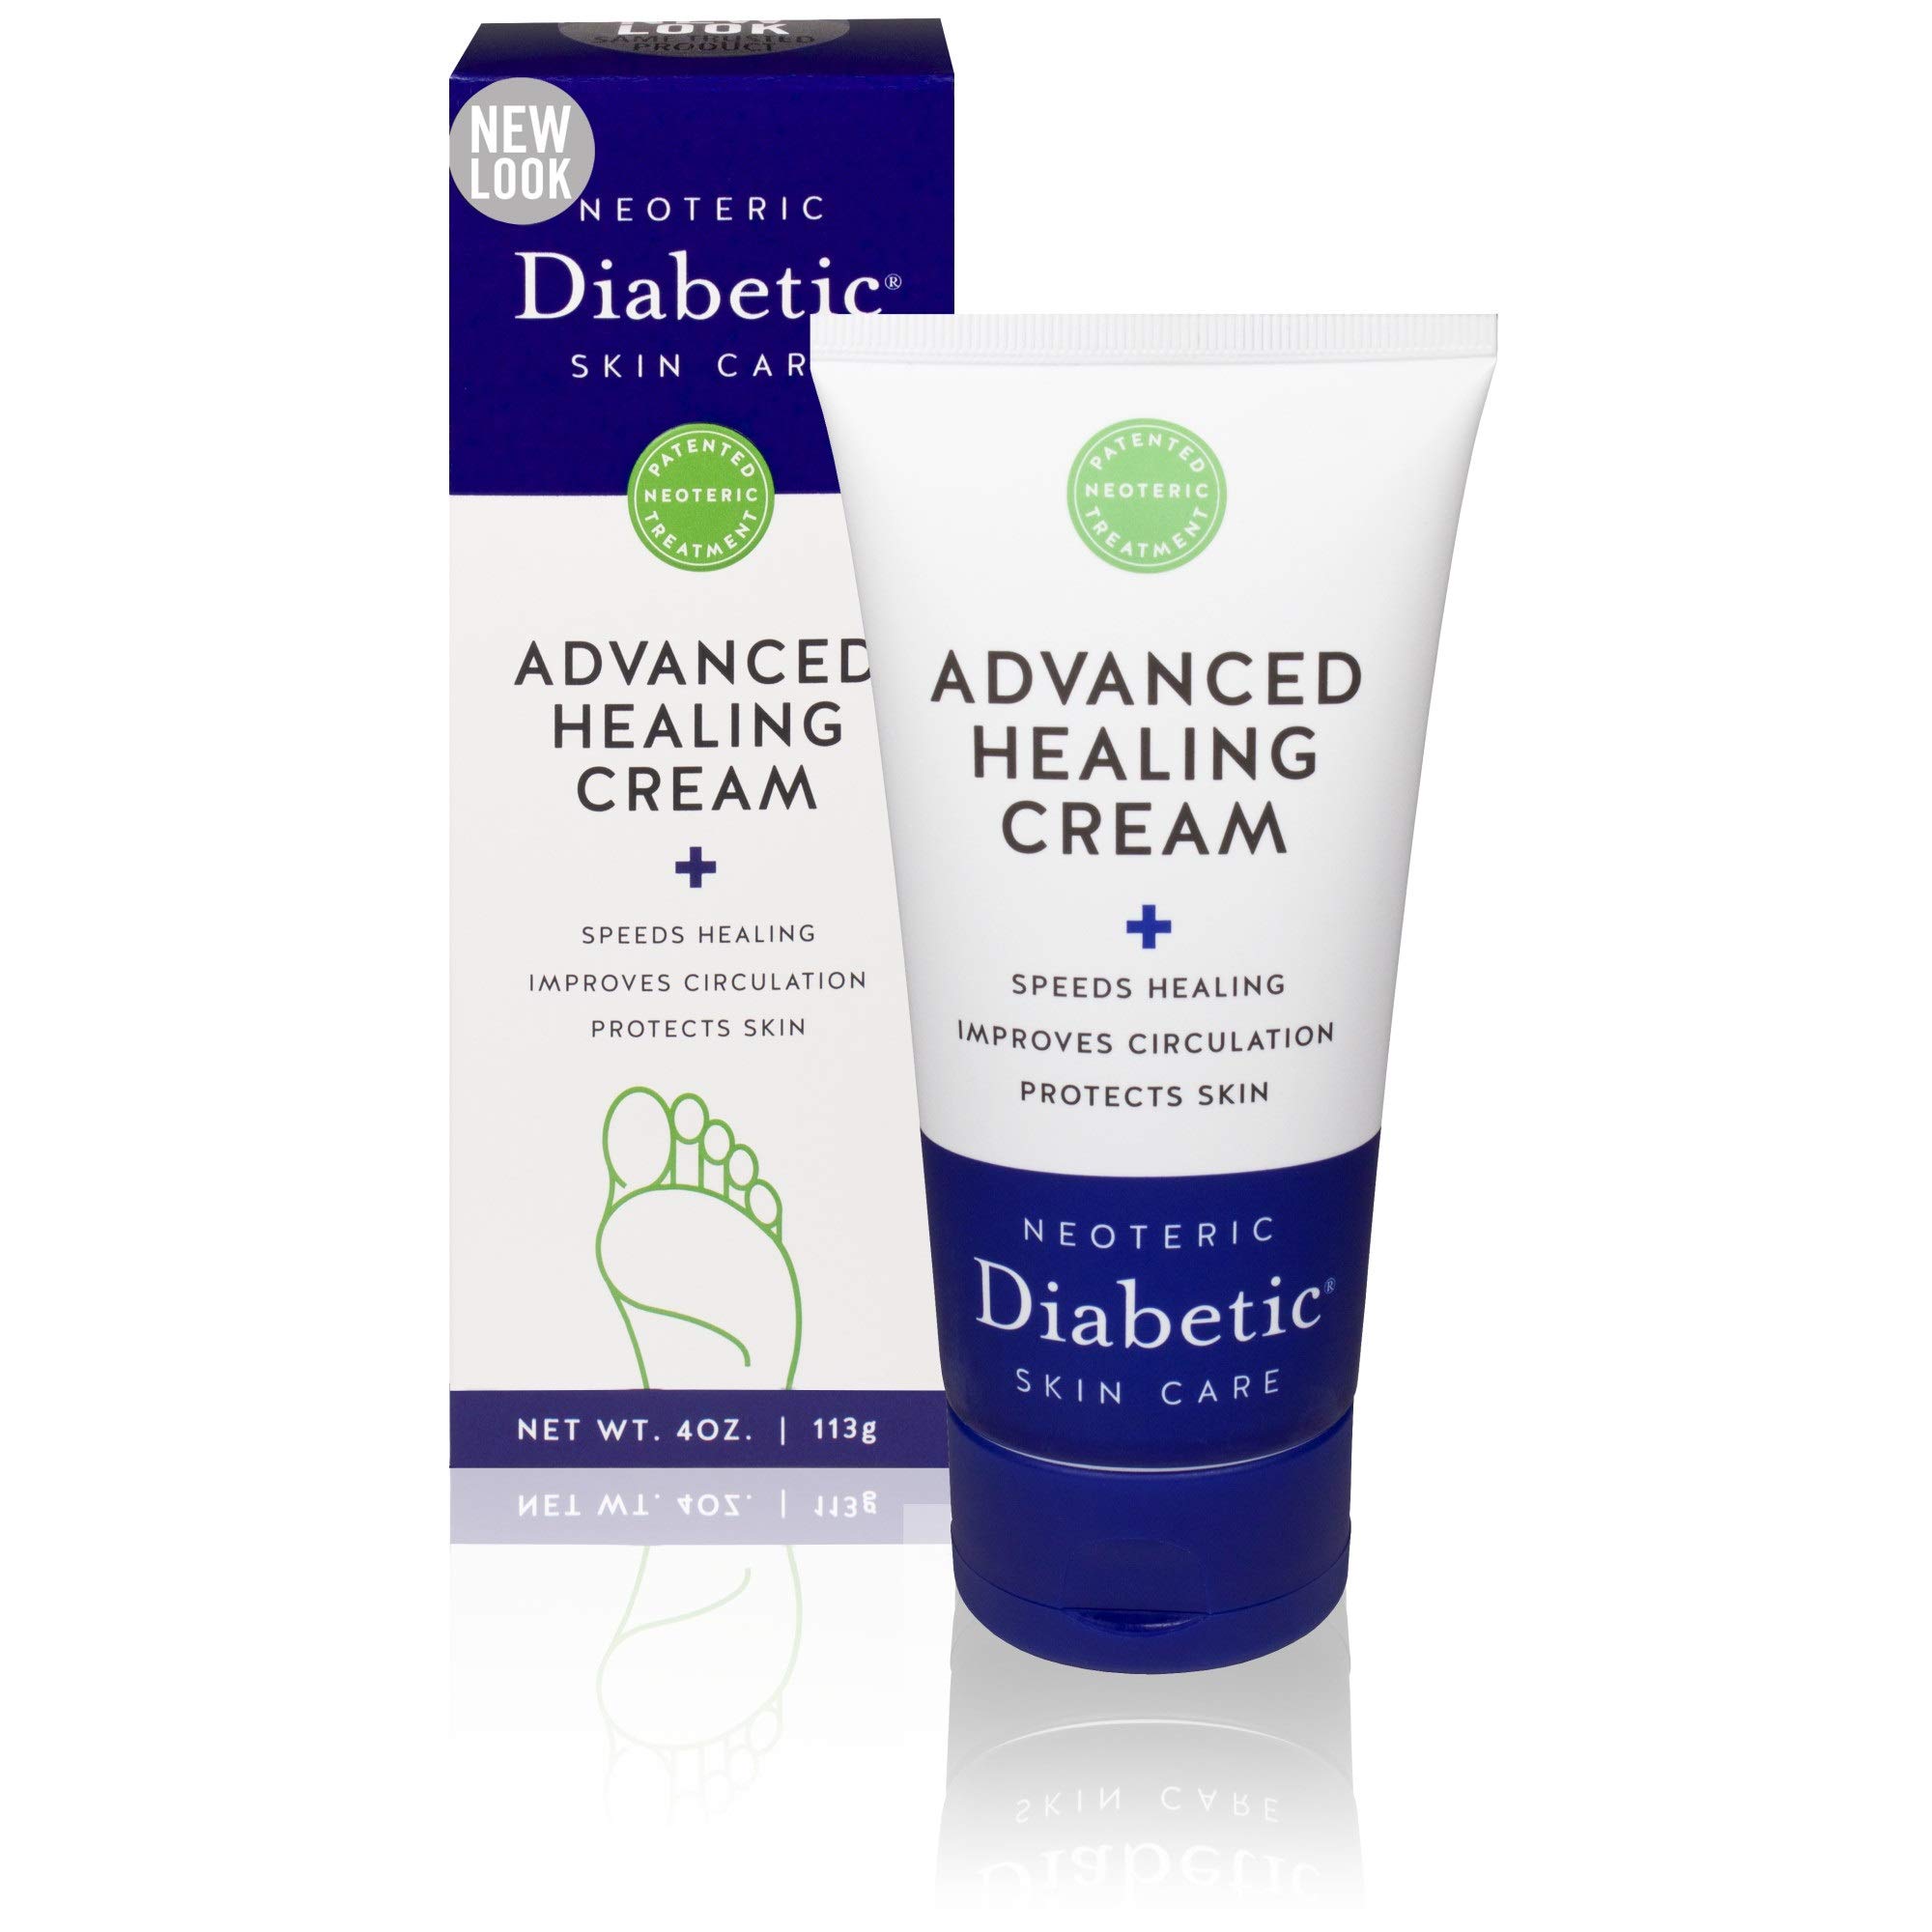 Neoteric Diabetic - Advanced Healing Cream, Speeds Healing and Improves Circulation| Patented Treatment| Non-Greasy, 4-Ounce